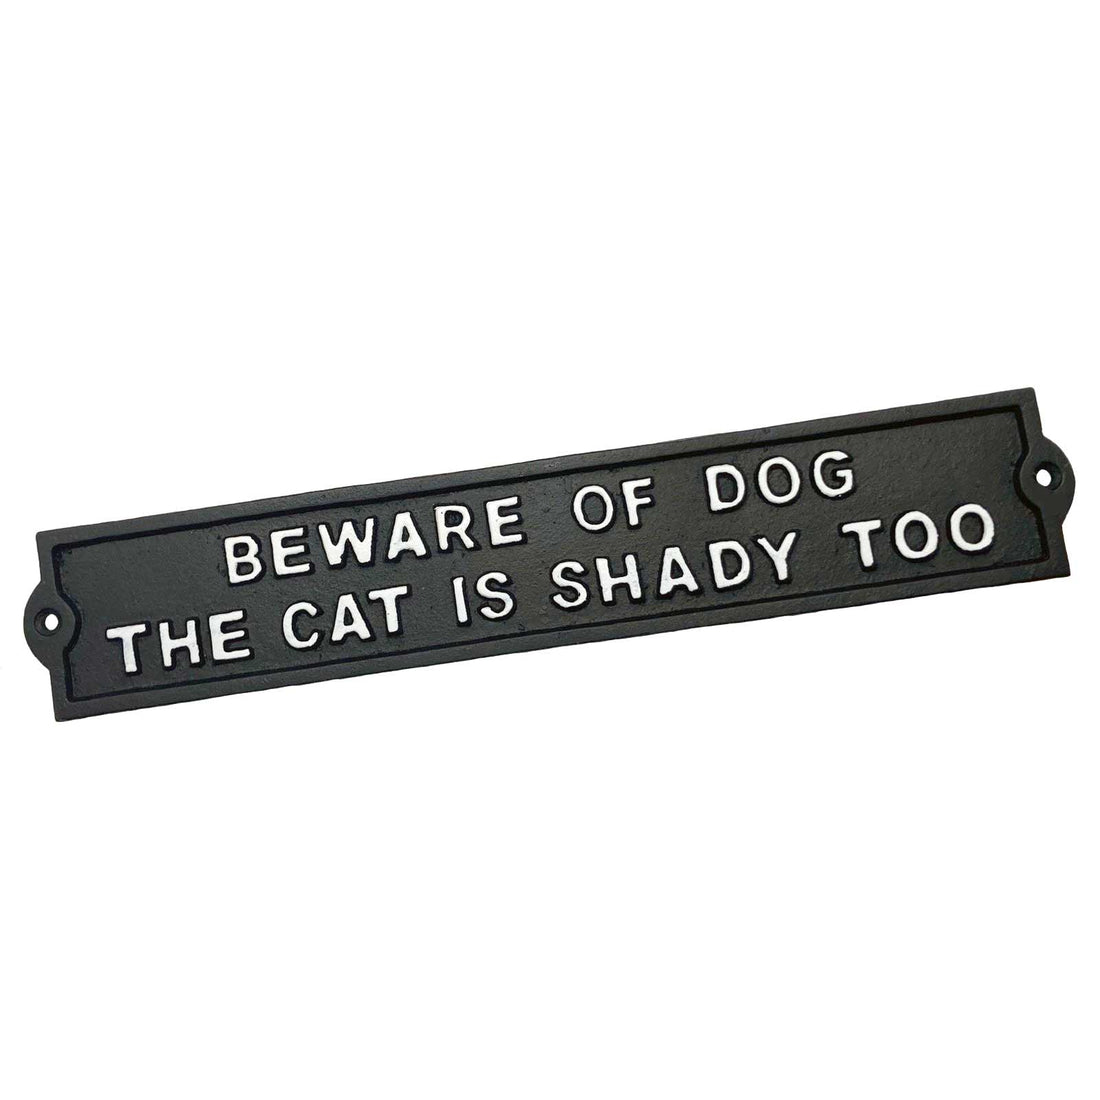 Mr Gecko Beware of Dog The Cat is Shady Too Cast Iron Sign